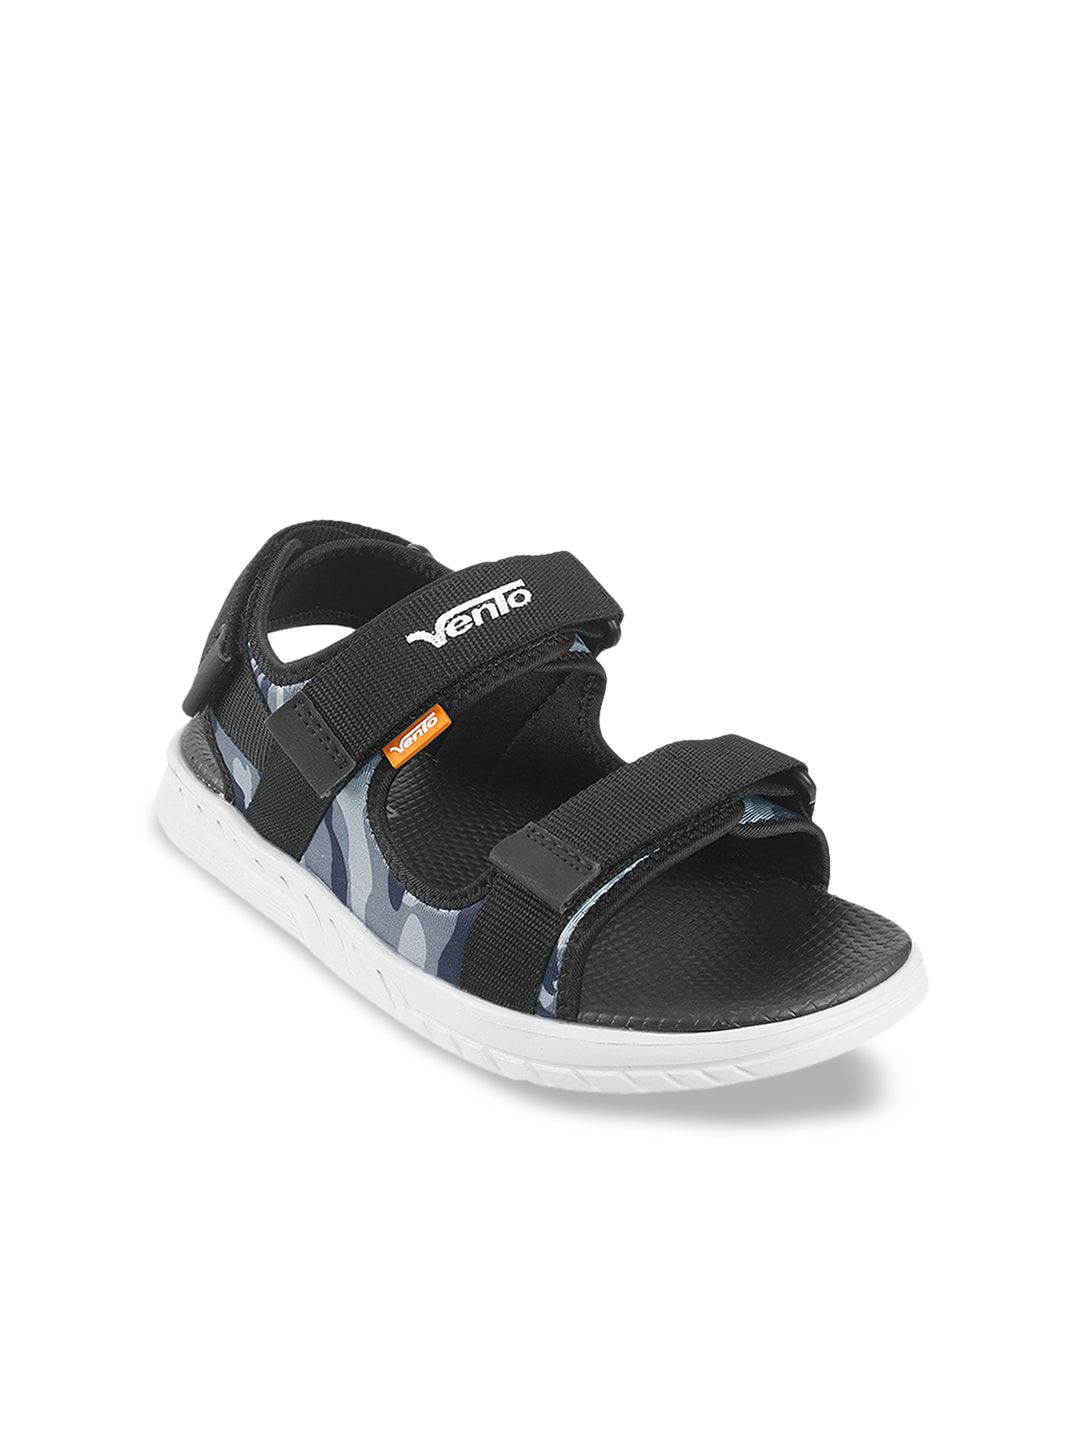 Vento Unisex Black & Blue Camouflage Printed Sports Sandals Price in India